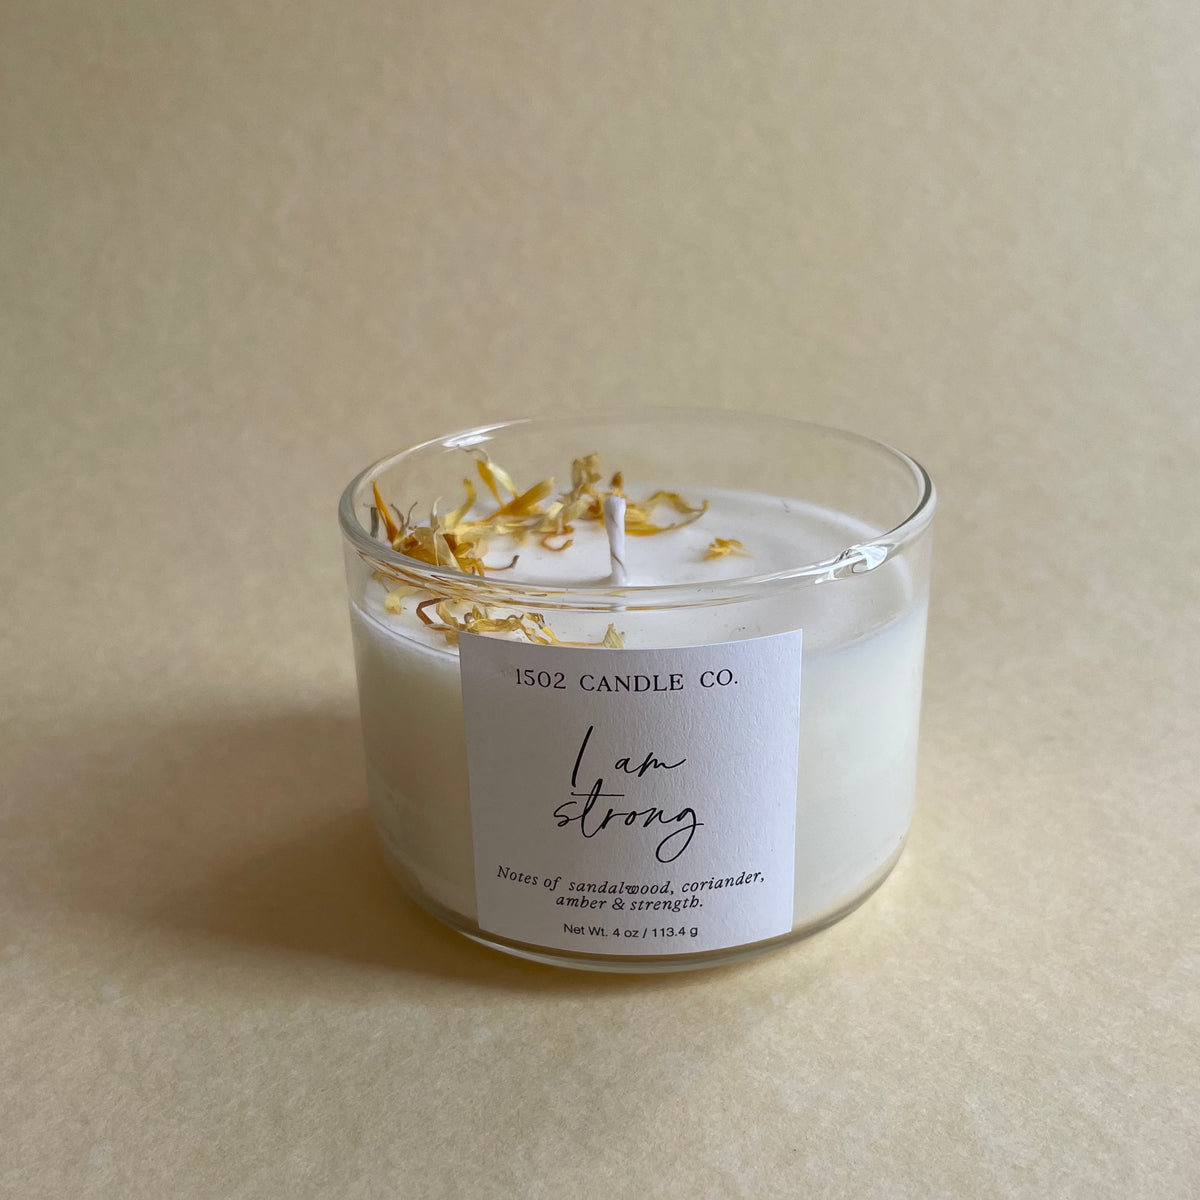 1502 Candle - Affirmation "I Am Strong"